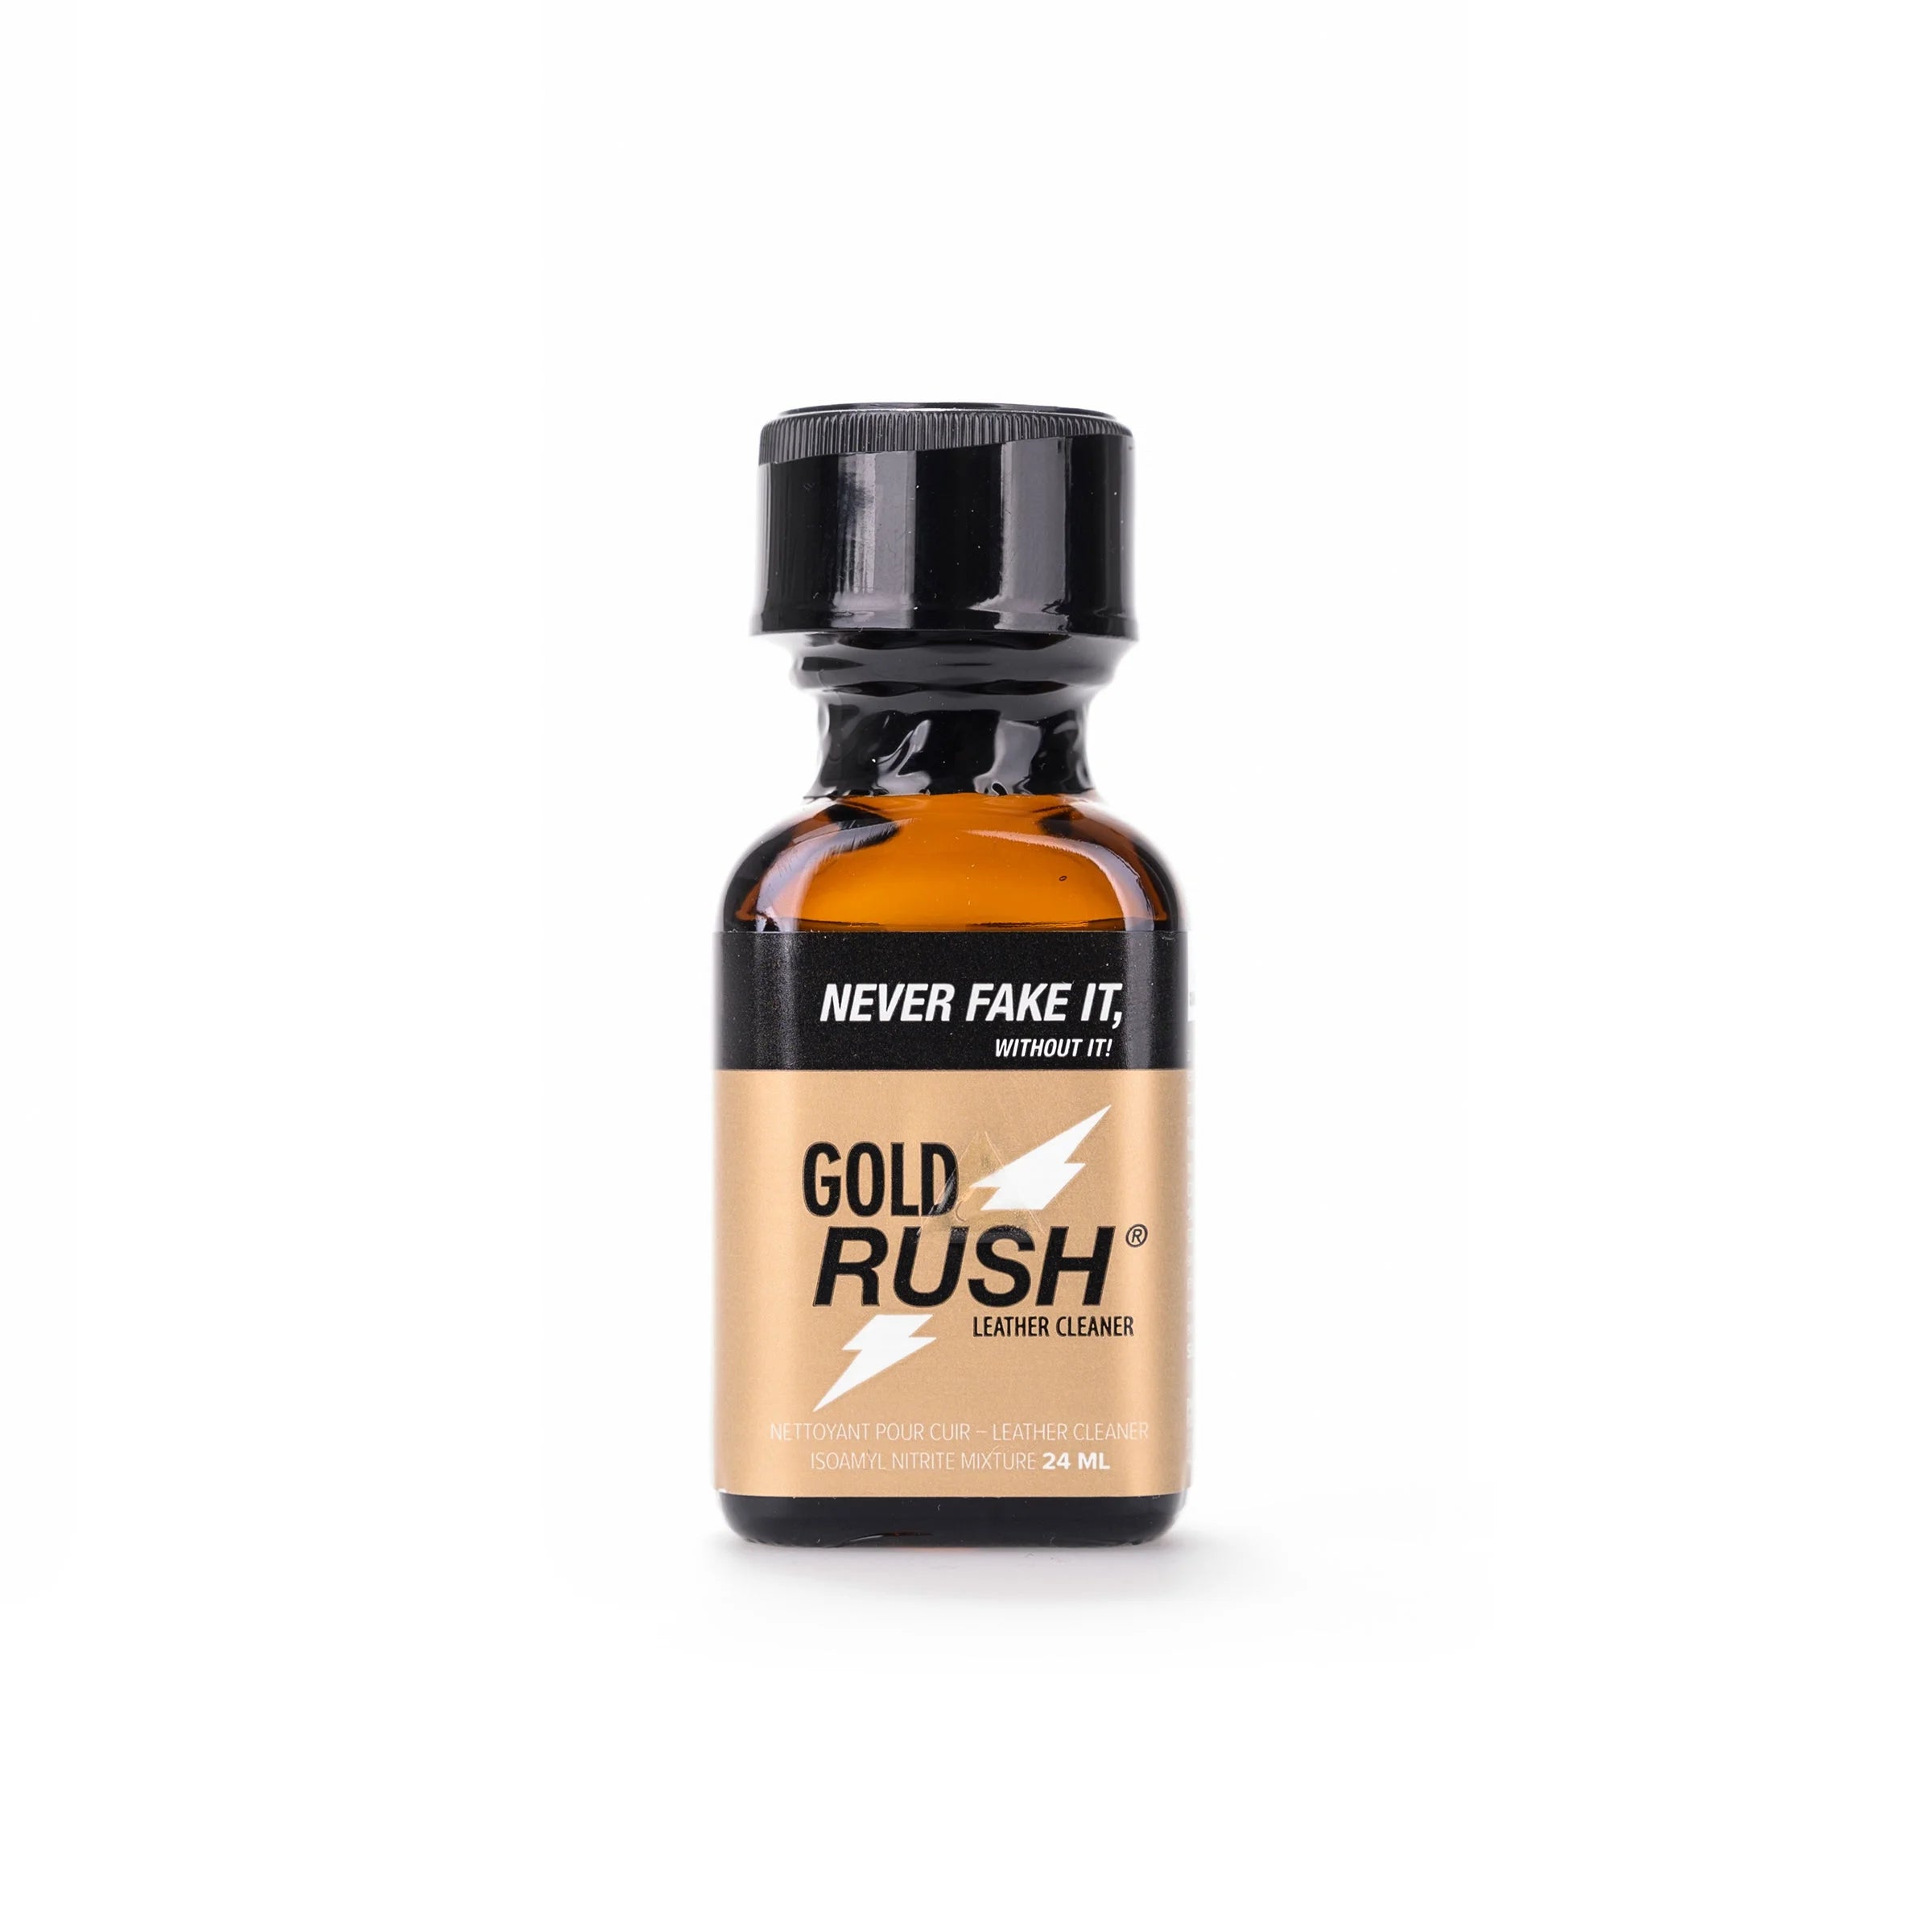 A product photo of Gold Rush poppers.